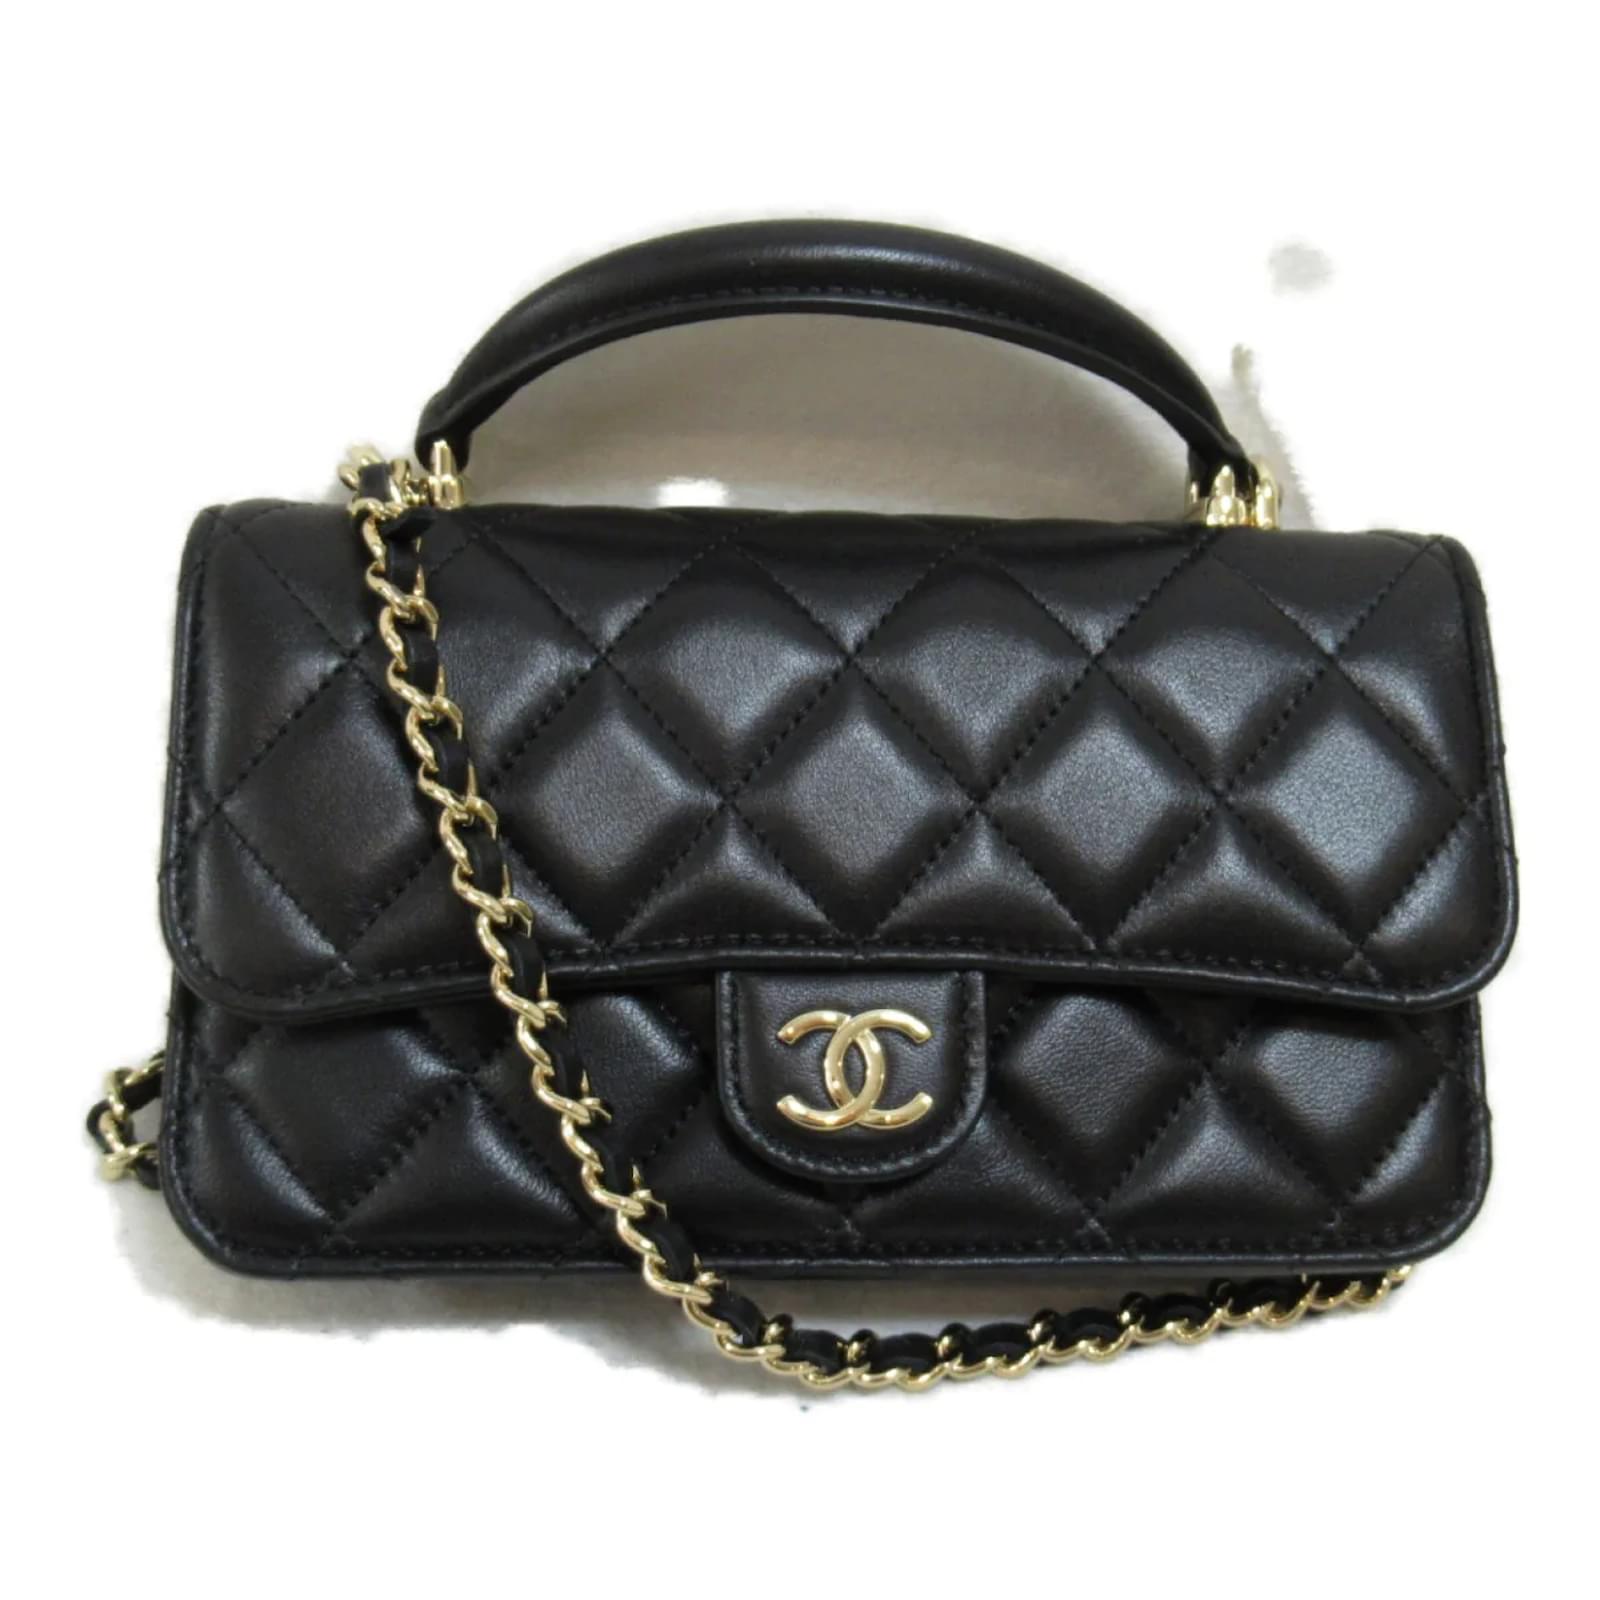 chanel quilted handbag leather